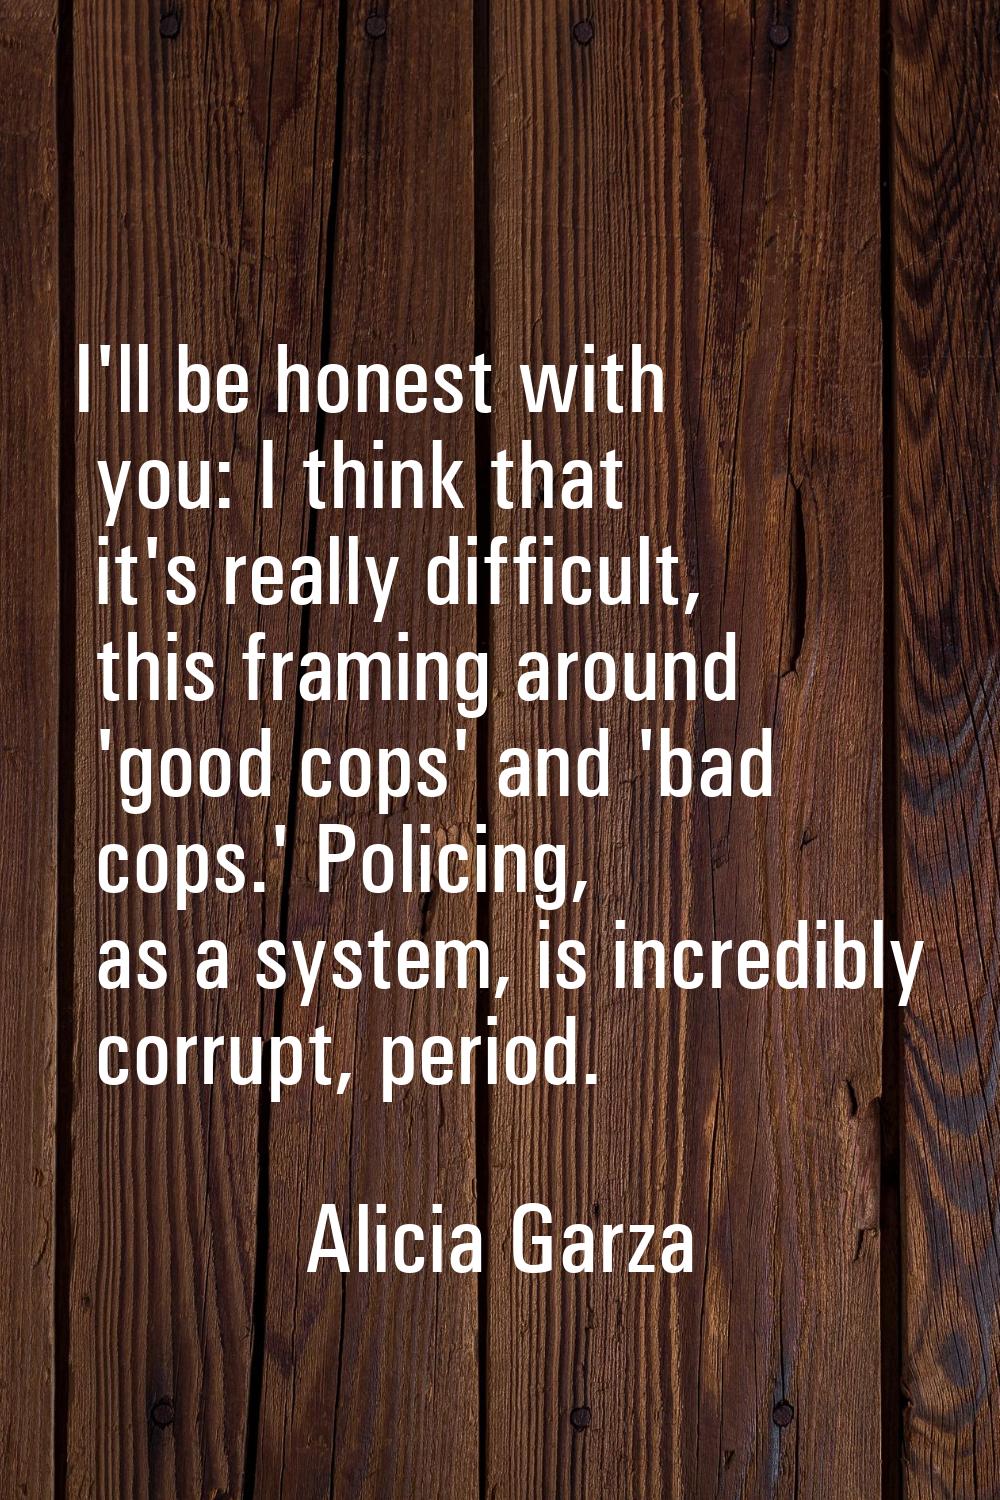 I'll be honest with you: I think that it's really difficult, this framing around 'good cops' and 'b